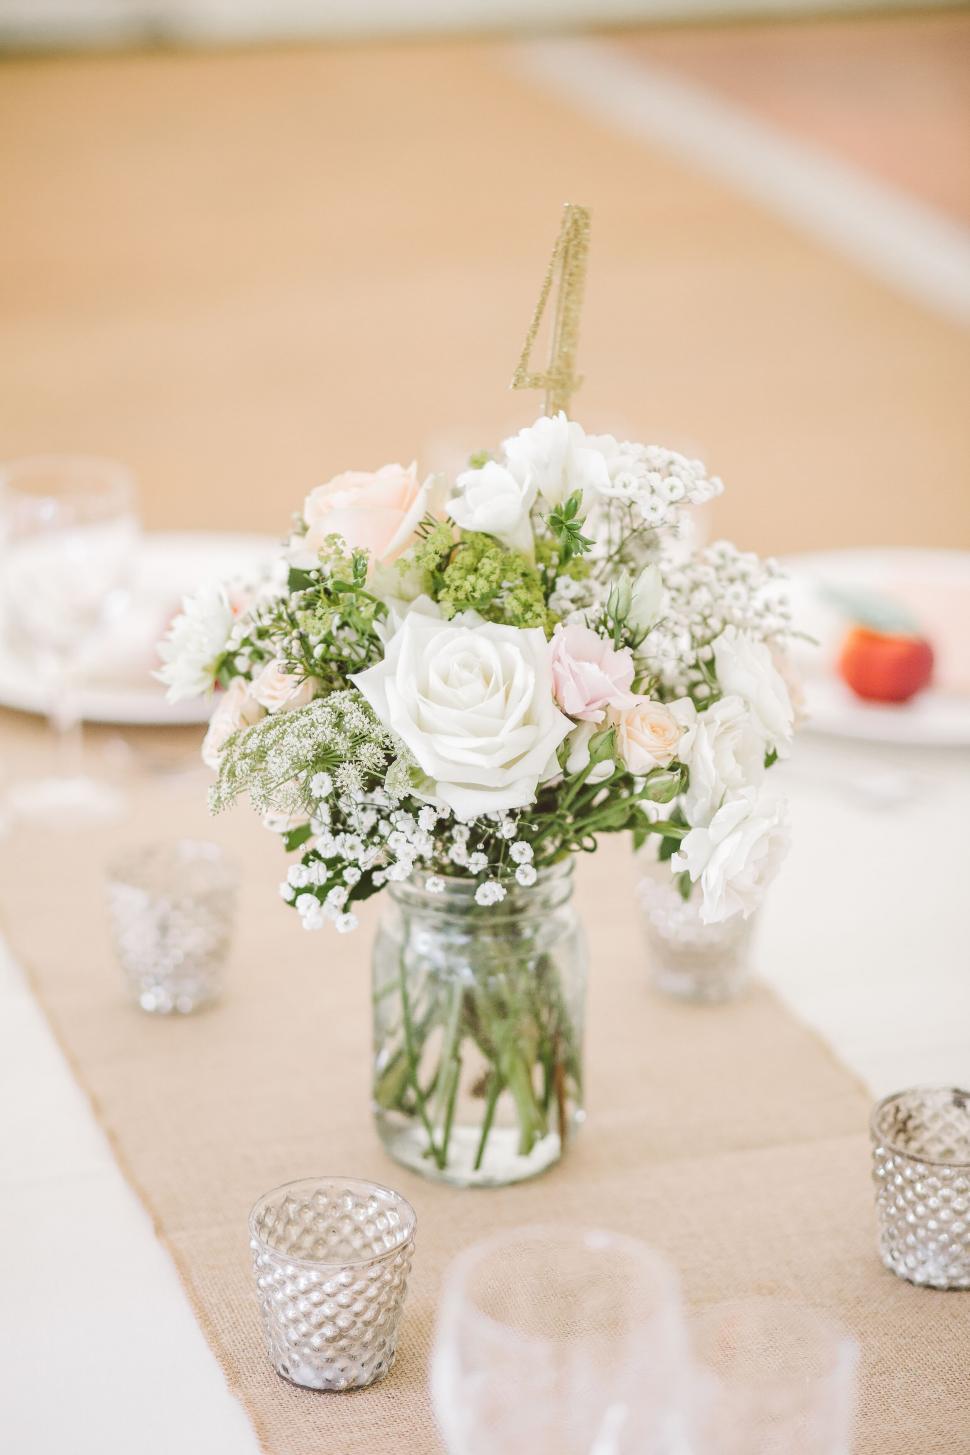 Free Image of Elegant table set for an event 